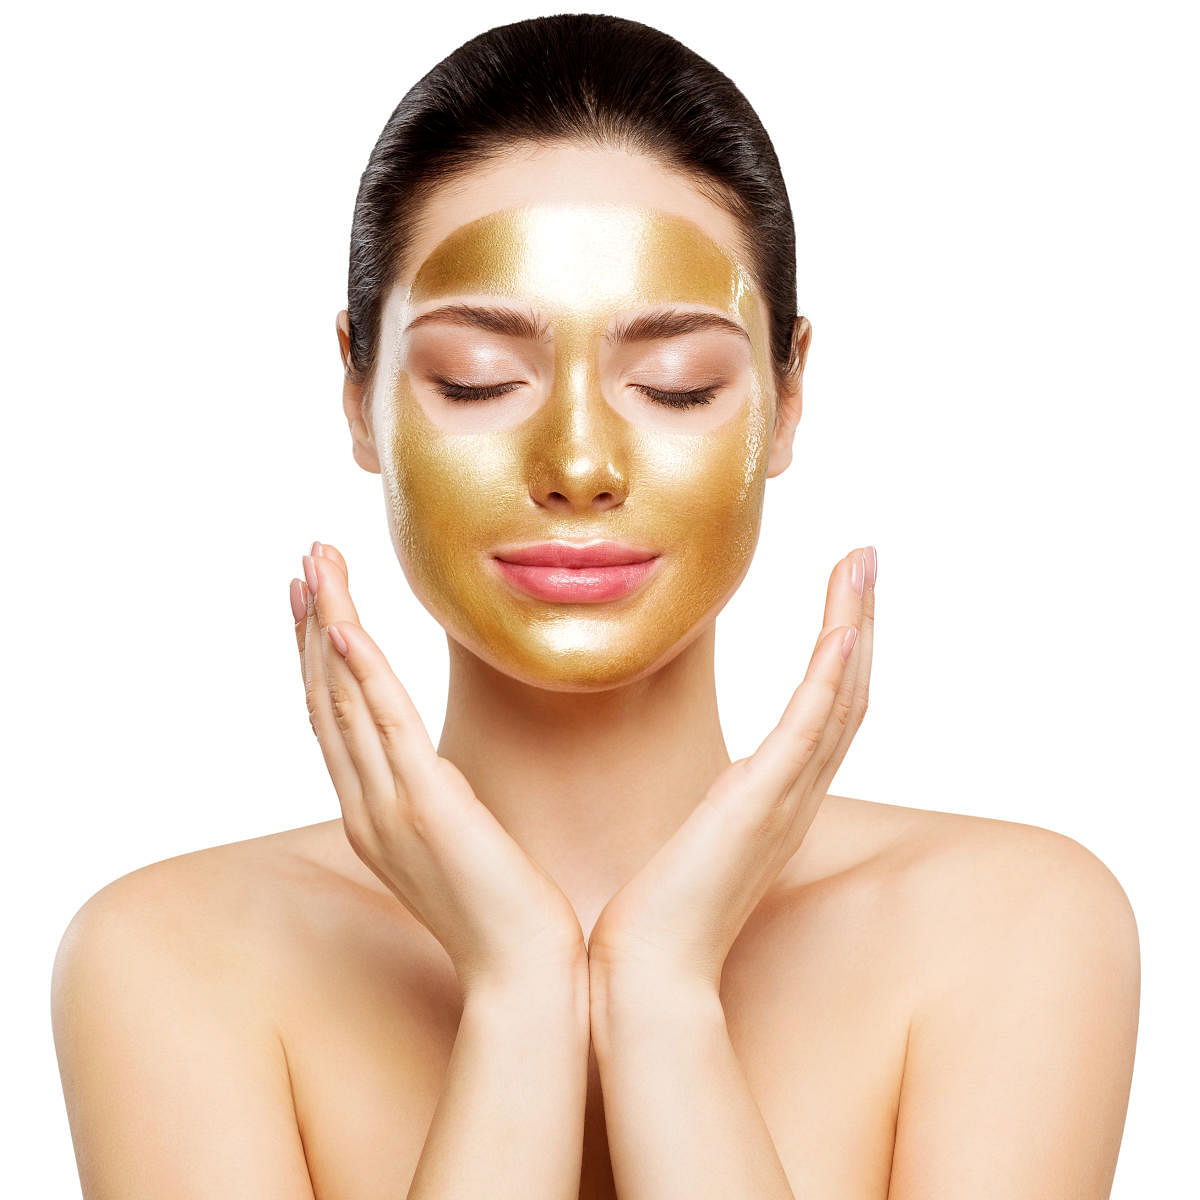 Multani mitti is said to clarify the skin and bring a glow.